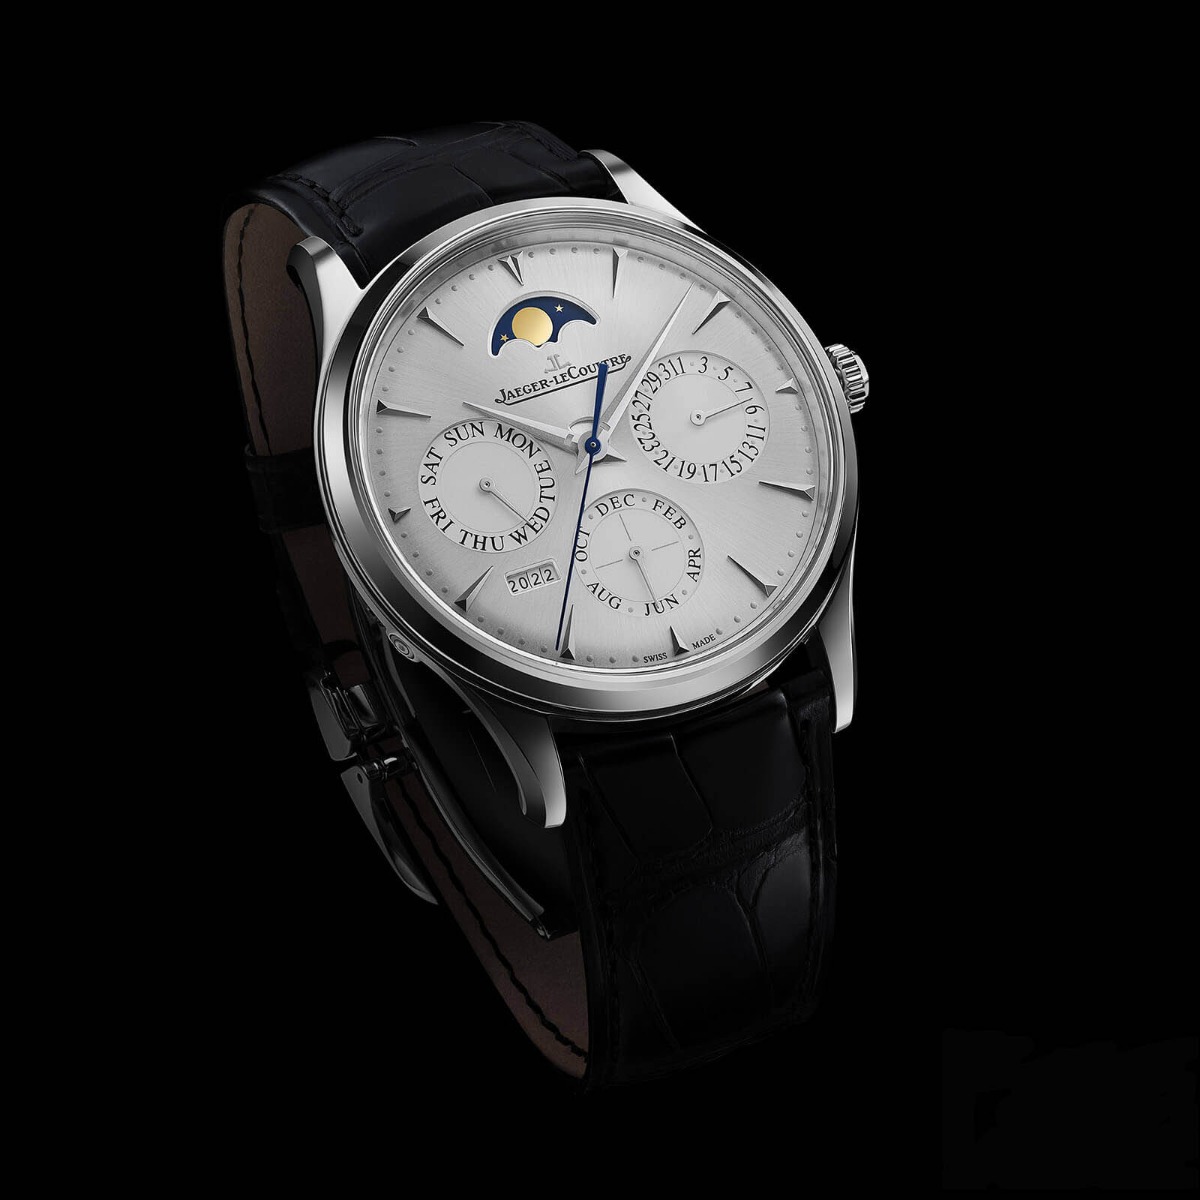 can-canh-dong-ho-jaeger-lecoultre